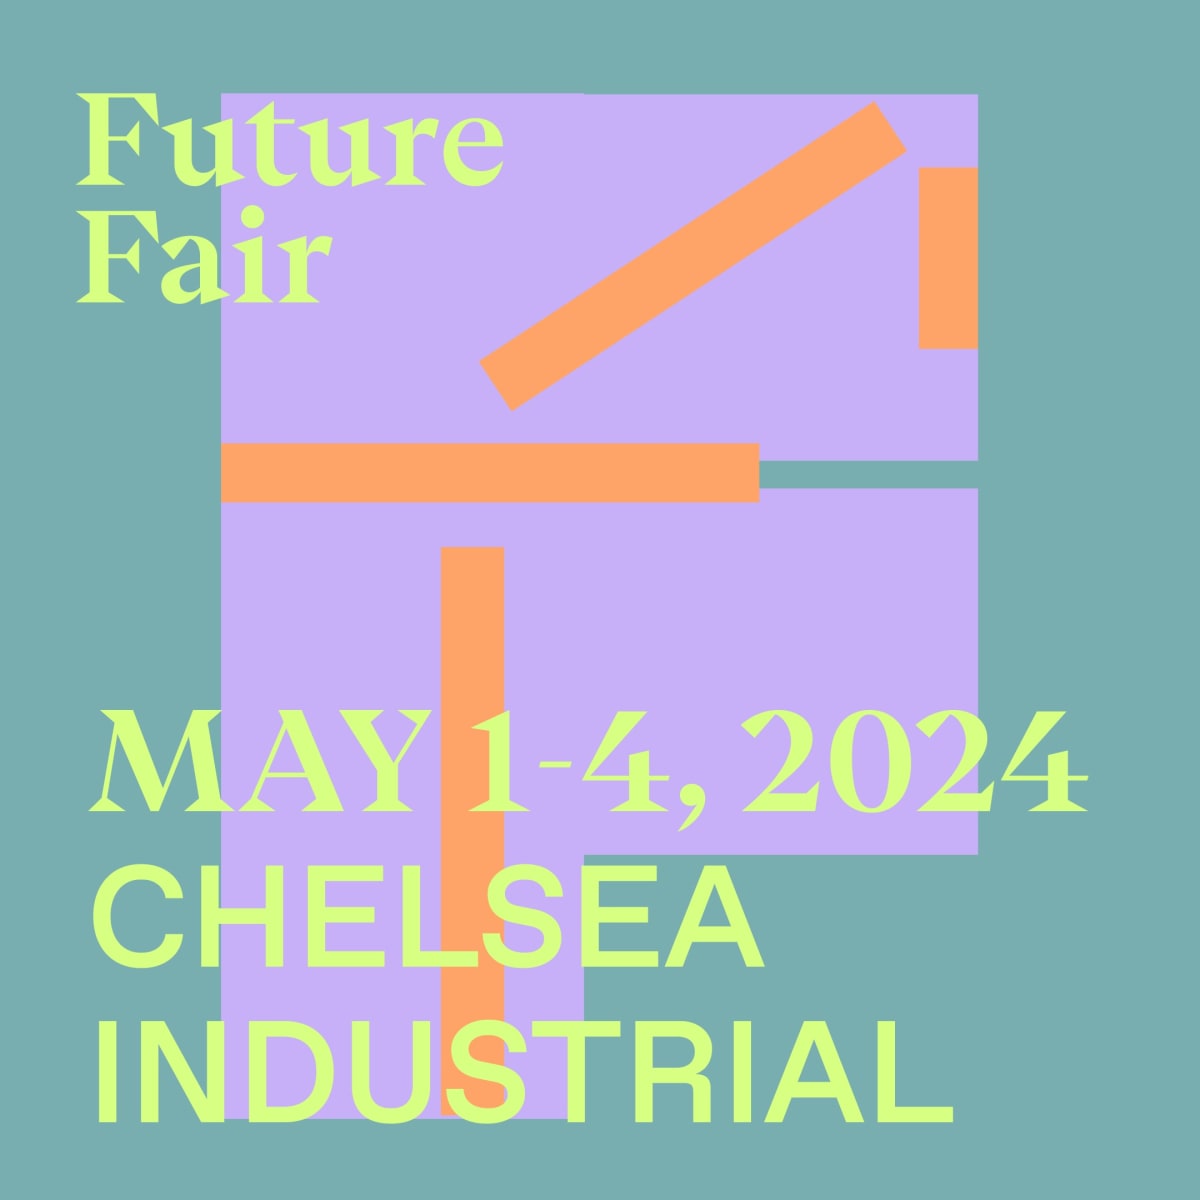 'Future Fair May 1 - 4, 2024 Chelsea Industrial' written in green, orange and purple